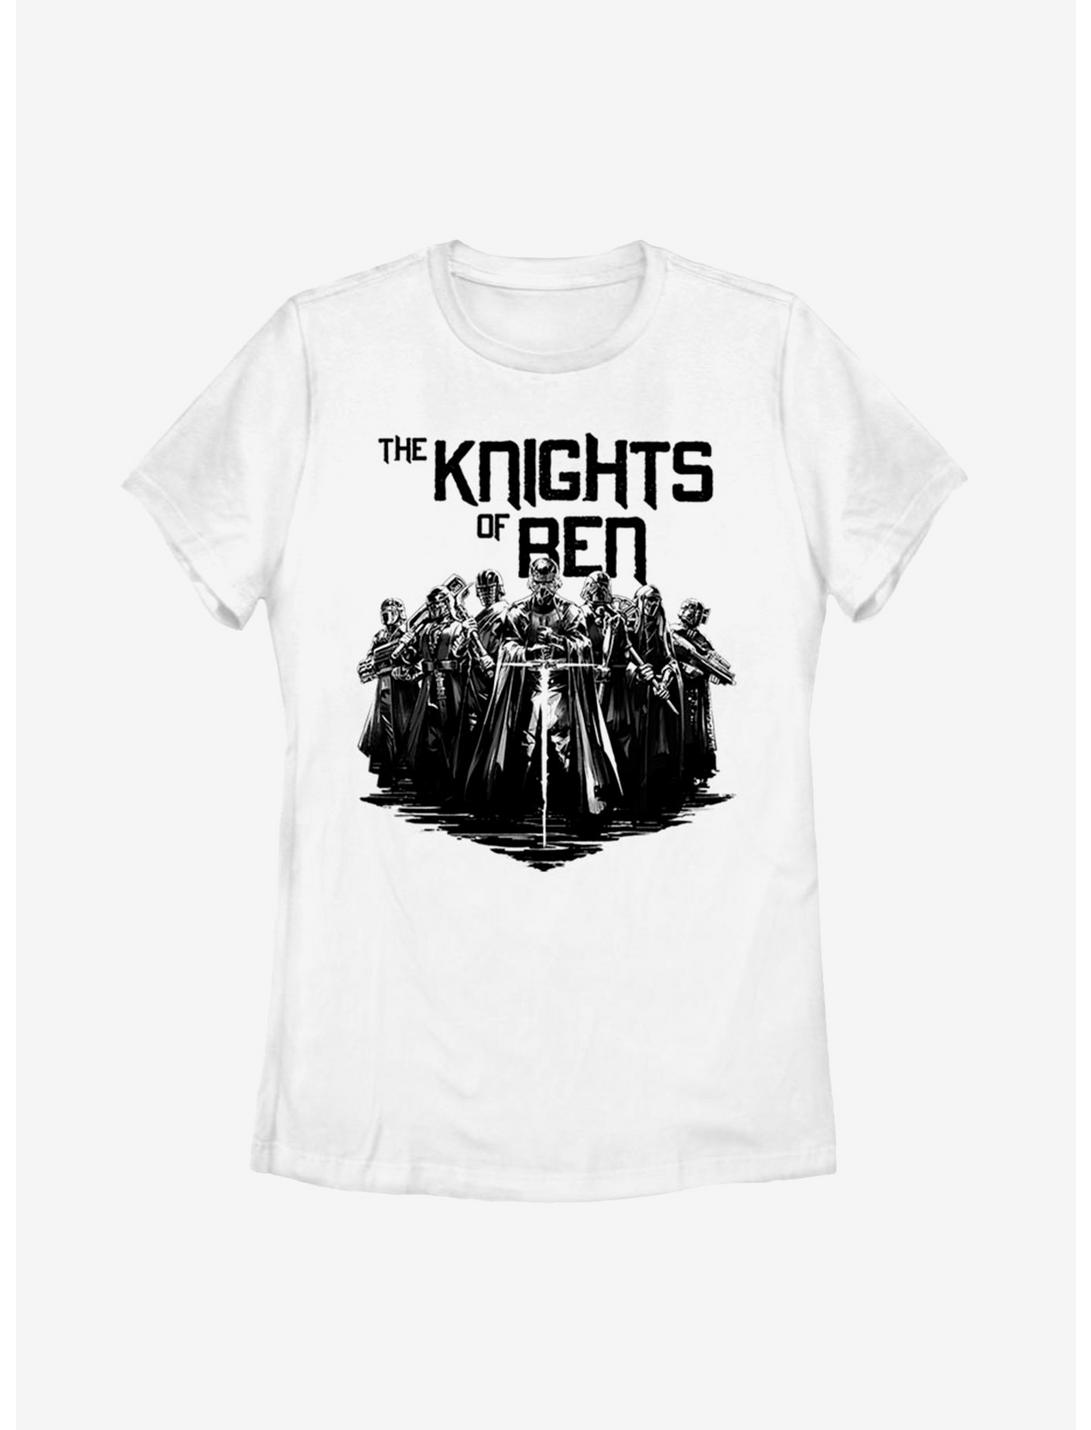 Star Wars Episode IX The Rise Of Skywalker Inked Knights Womens T-Shirt, WHITE, hi-res